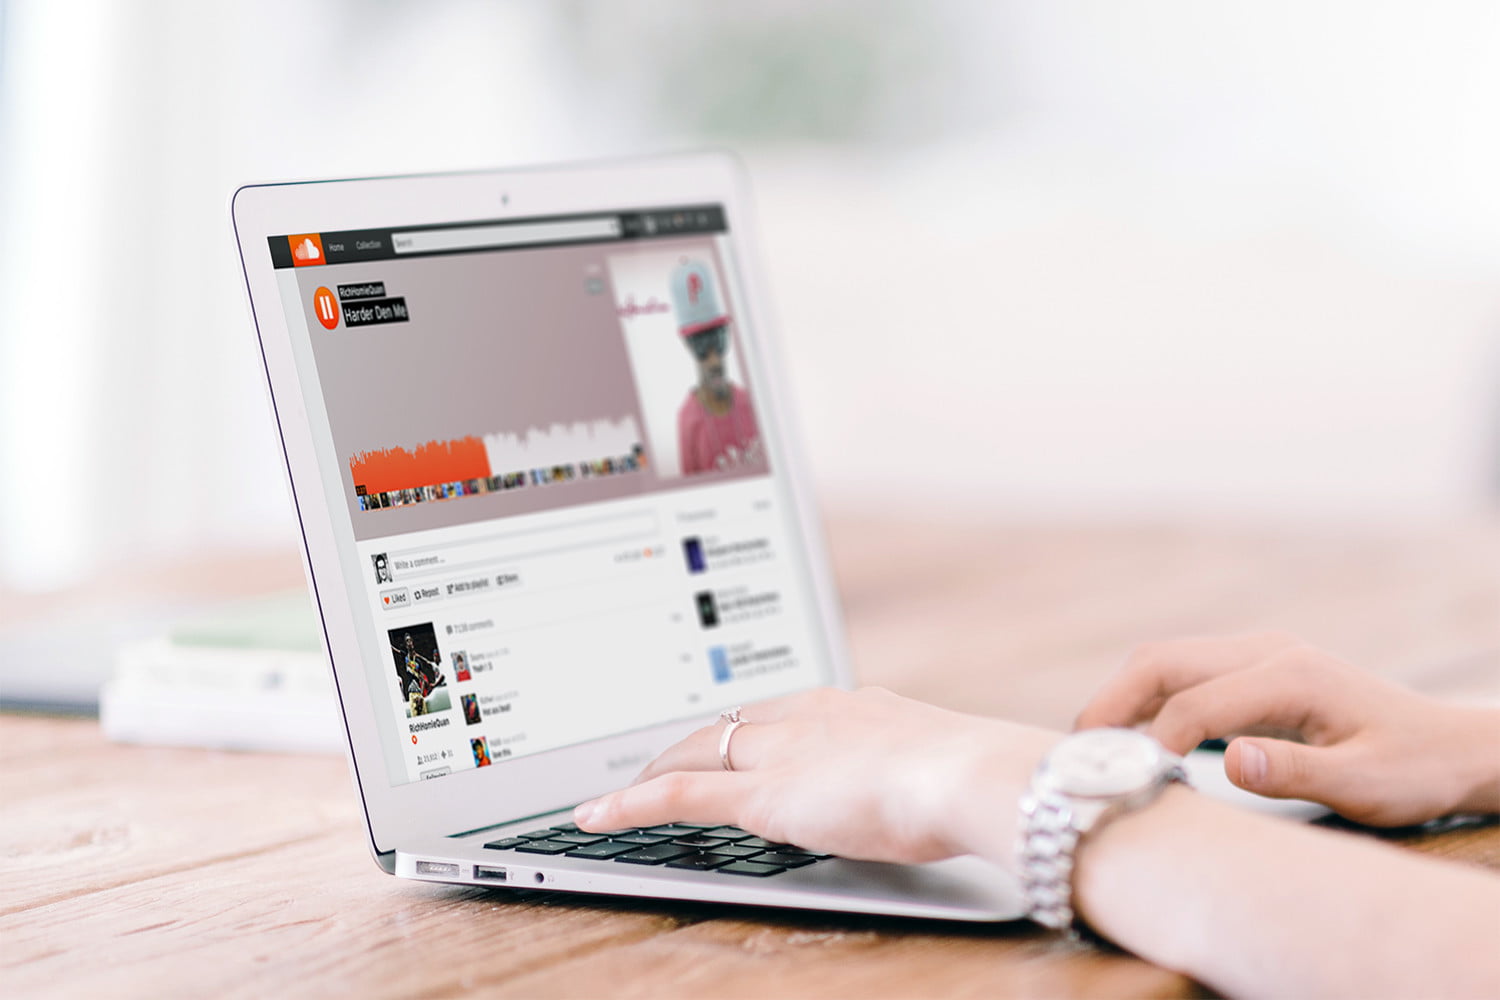 How To Download Soundcloud In Mac